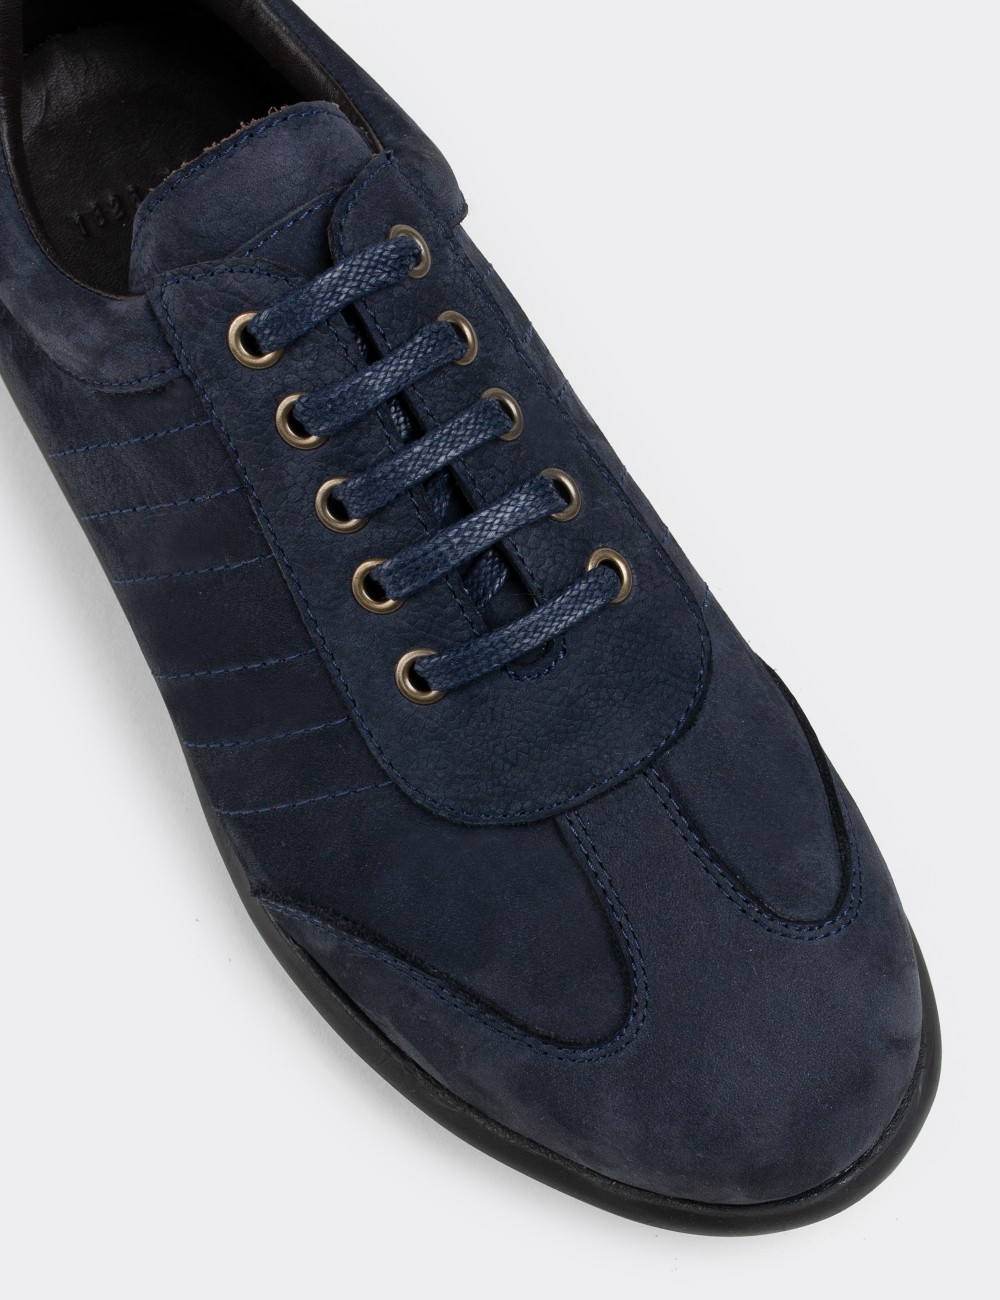 Navy Nubuck Leather Lace-up Shoes - 01826MLCVC01